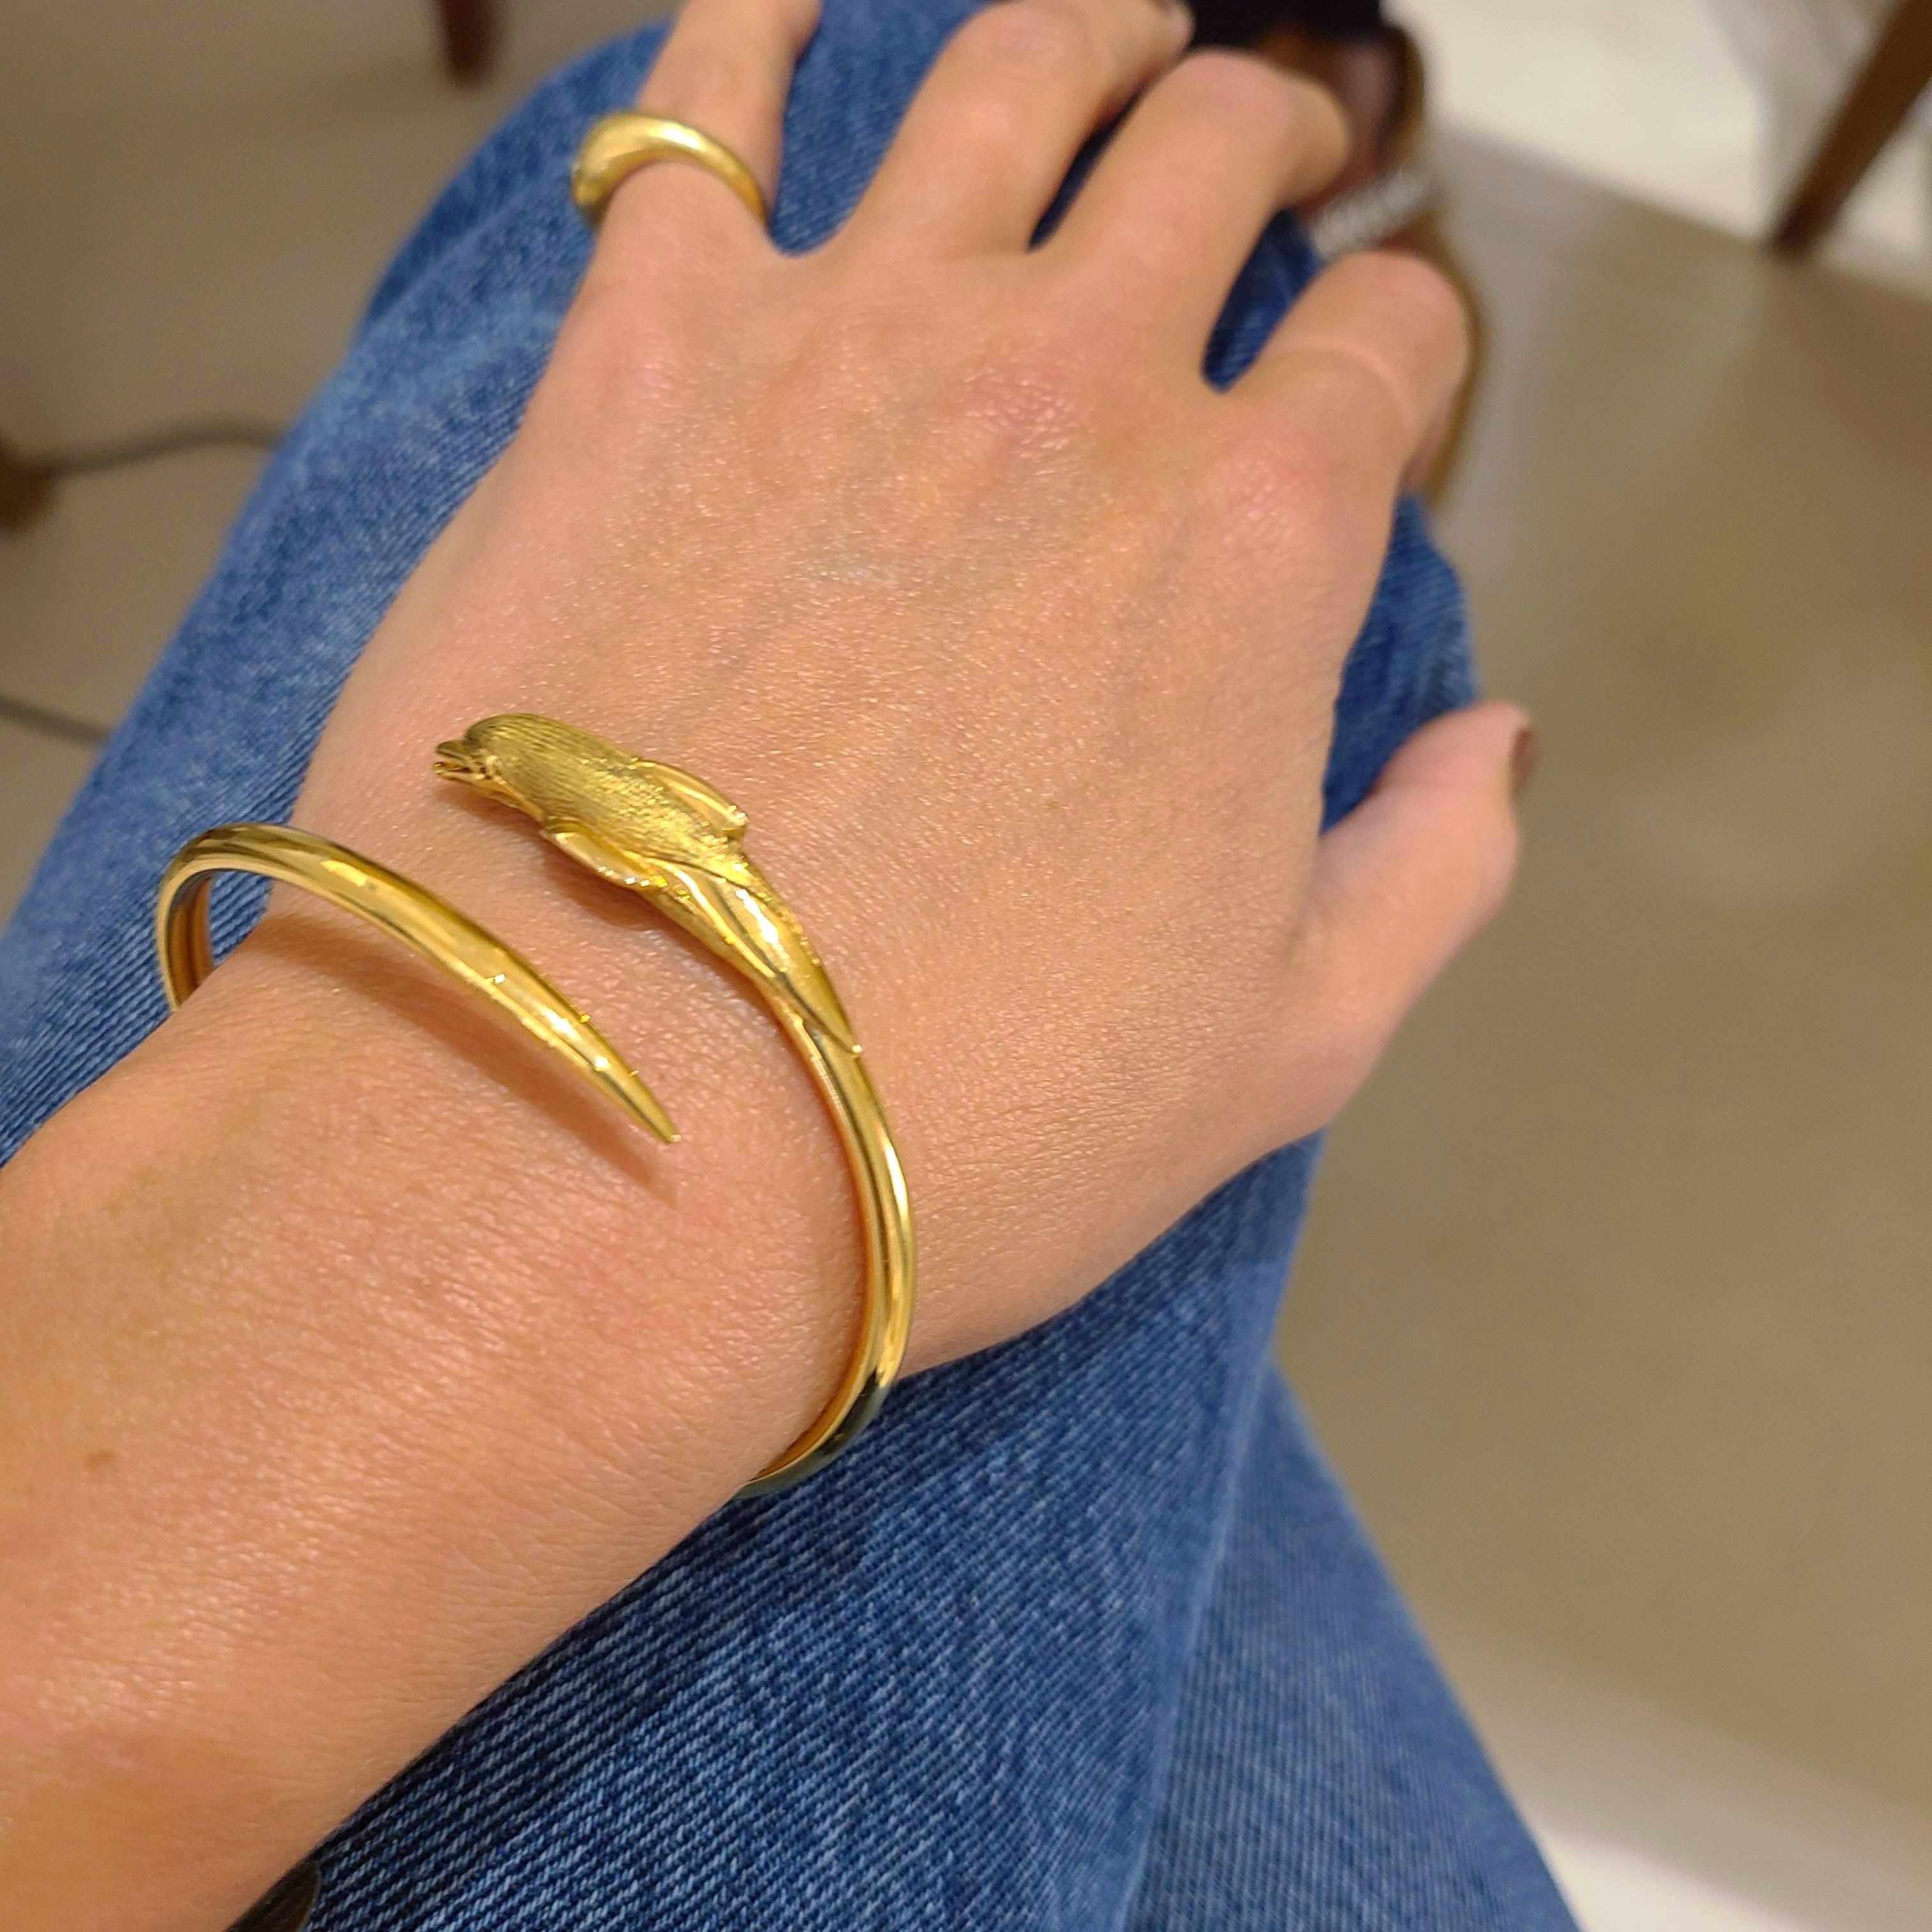 Easy to wear 18 karat yellow gold bracelet, at Cellini Jewelers NYC is Designed as a dolphin in a hi-polish and sandblasted finish. The eyes are set with brilliant cut rubies. 
The bracelet measures 2.50